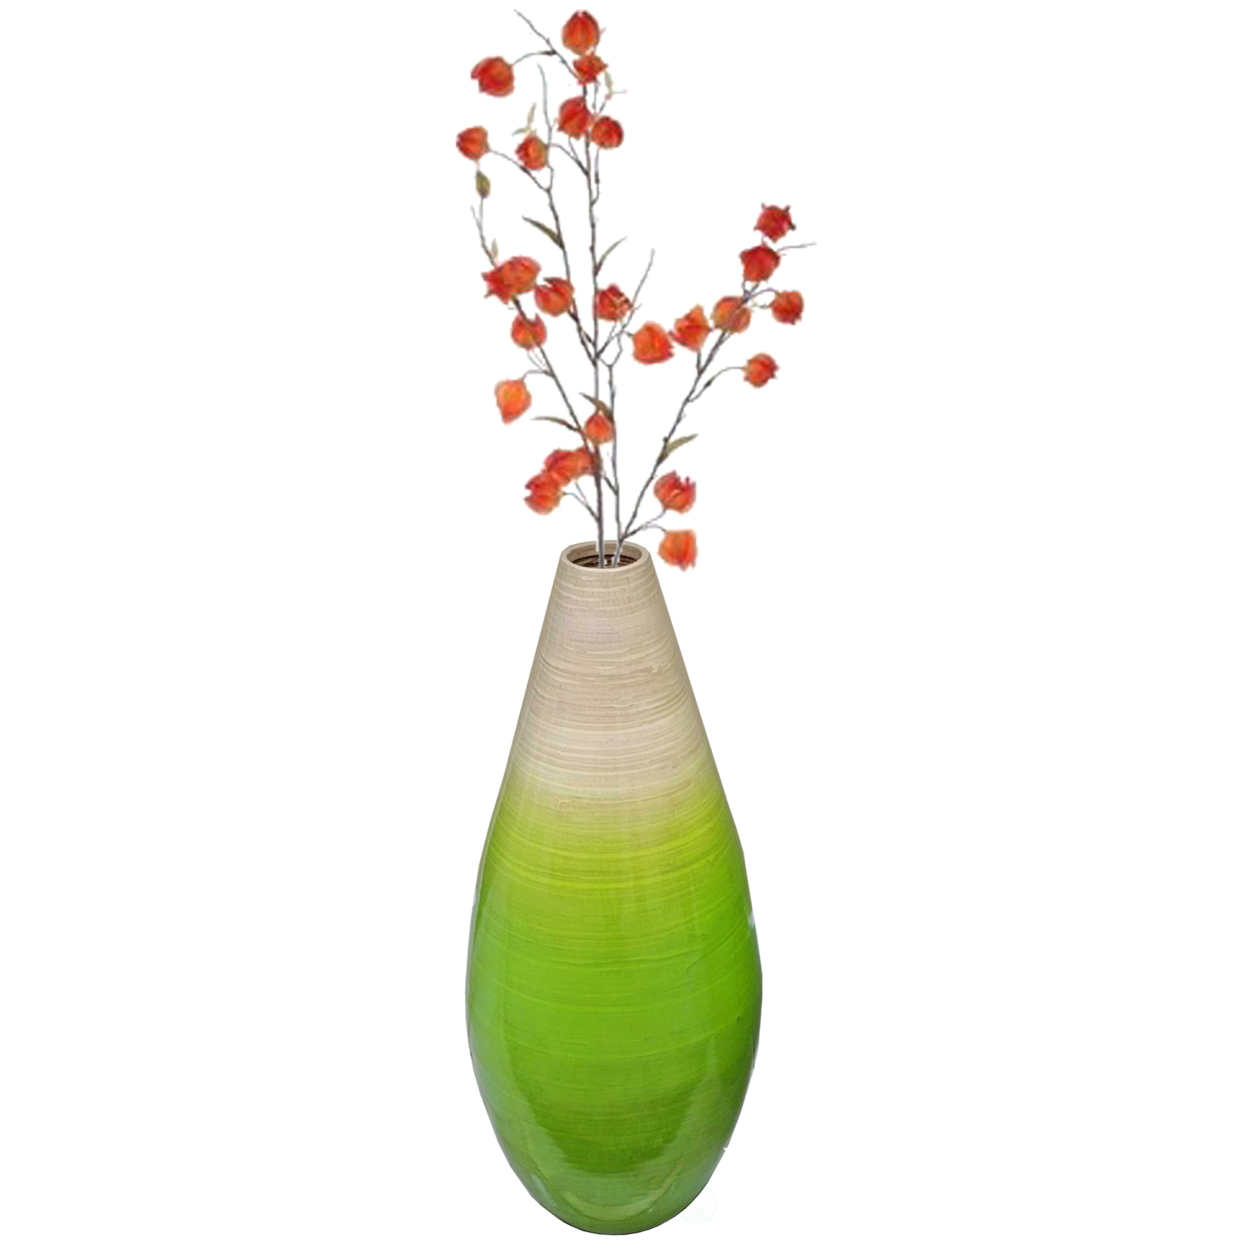 Contemporary Bamboo Floor Flower Vase Tear Drop Design For Dining, Living Room, Entryway Decoration, Green - Small